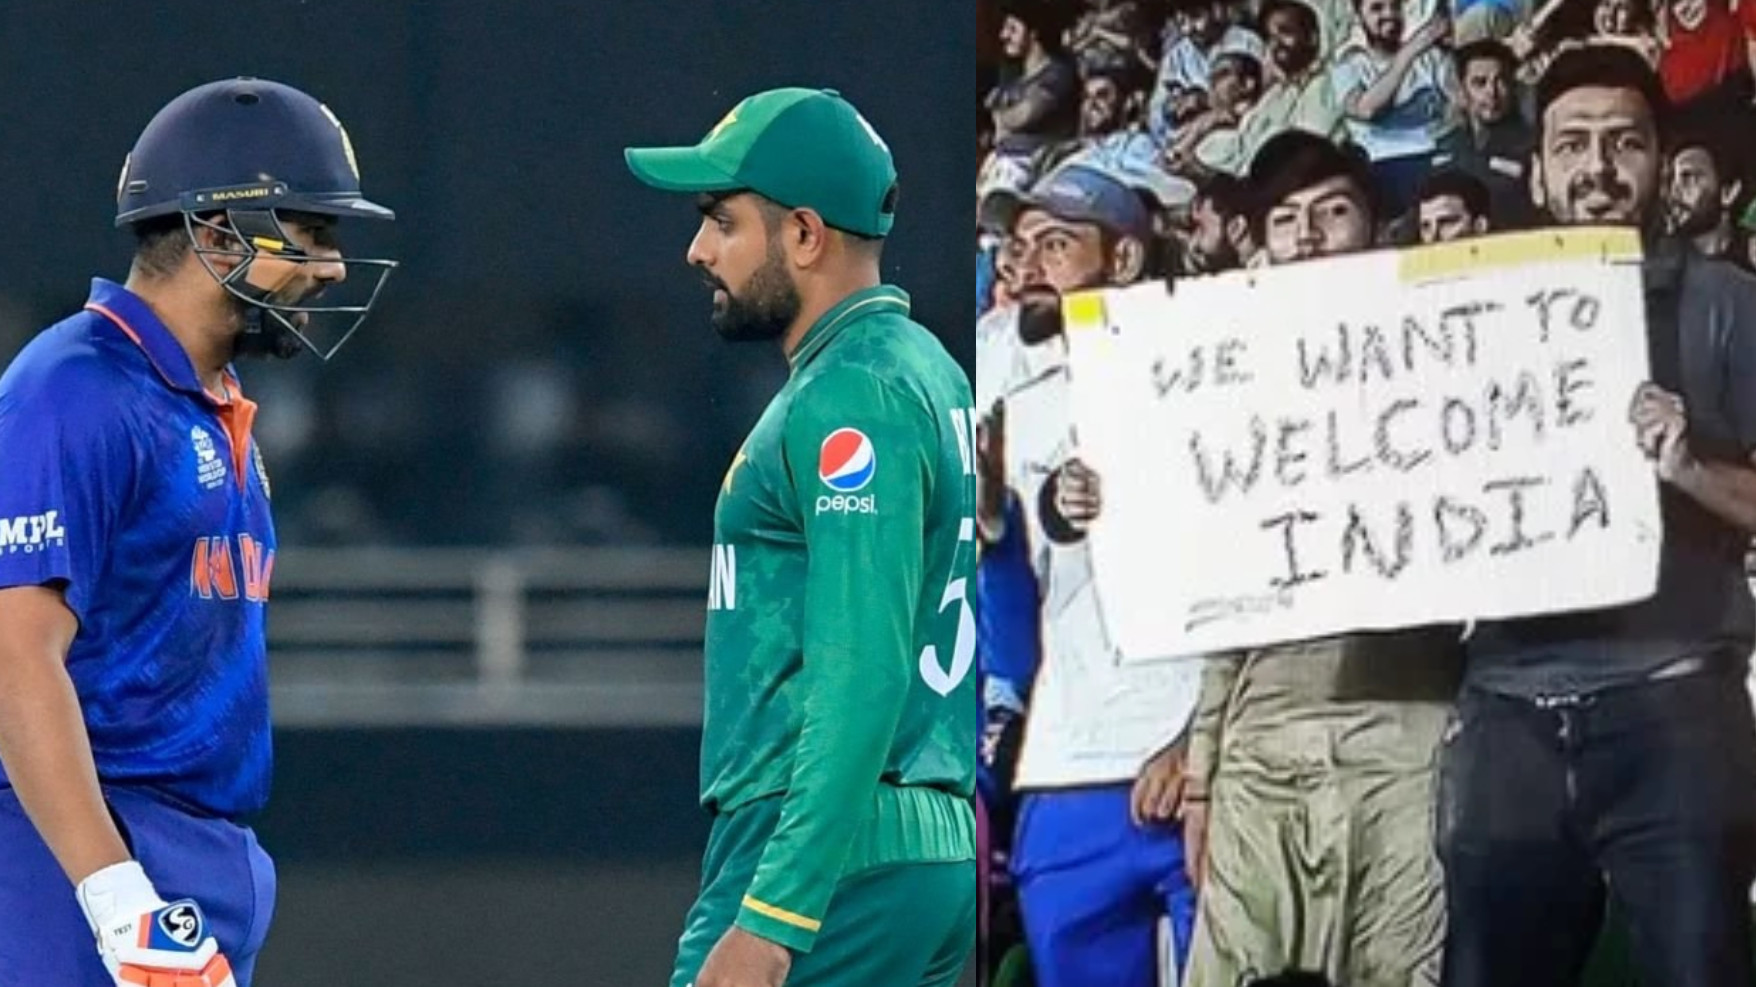 PAK v WI 2022: “We want to welcome Team India”- Pakistan fan’s special request during 3rd ODI goes viral 